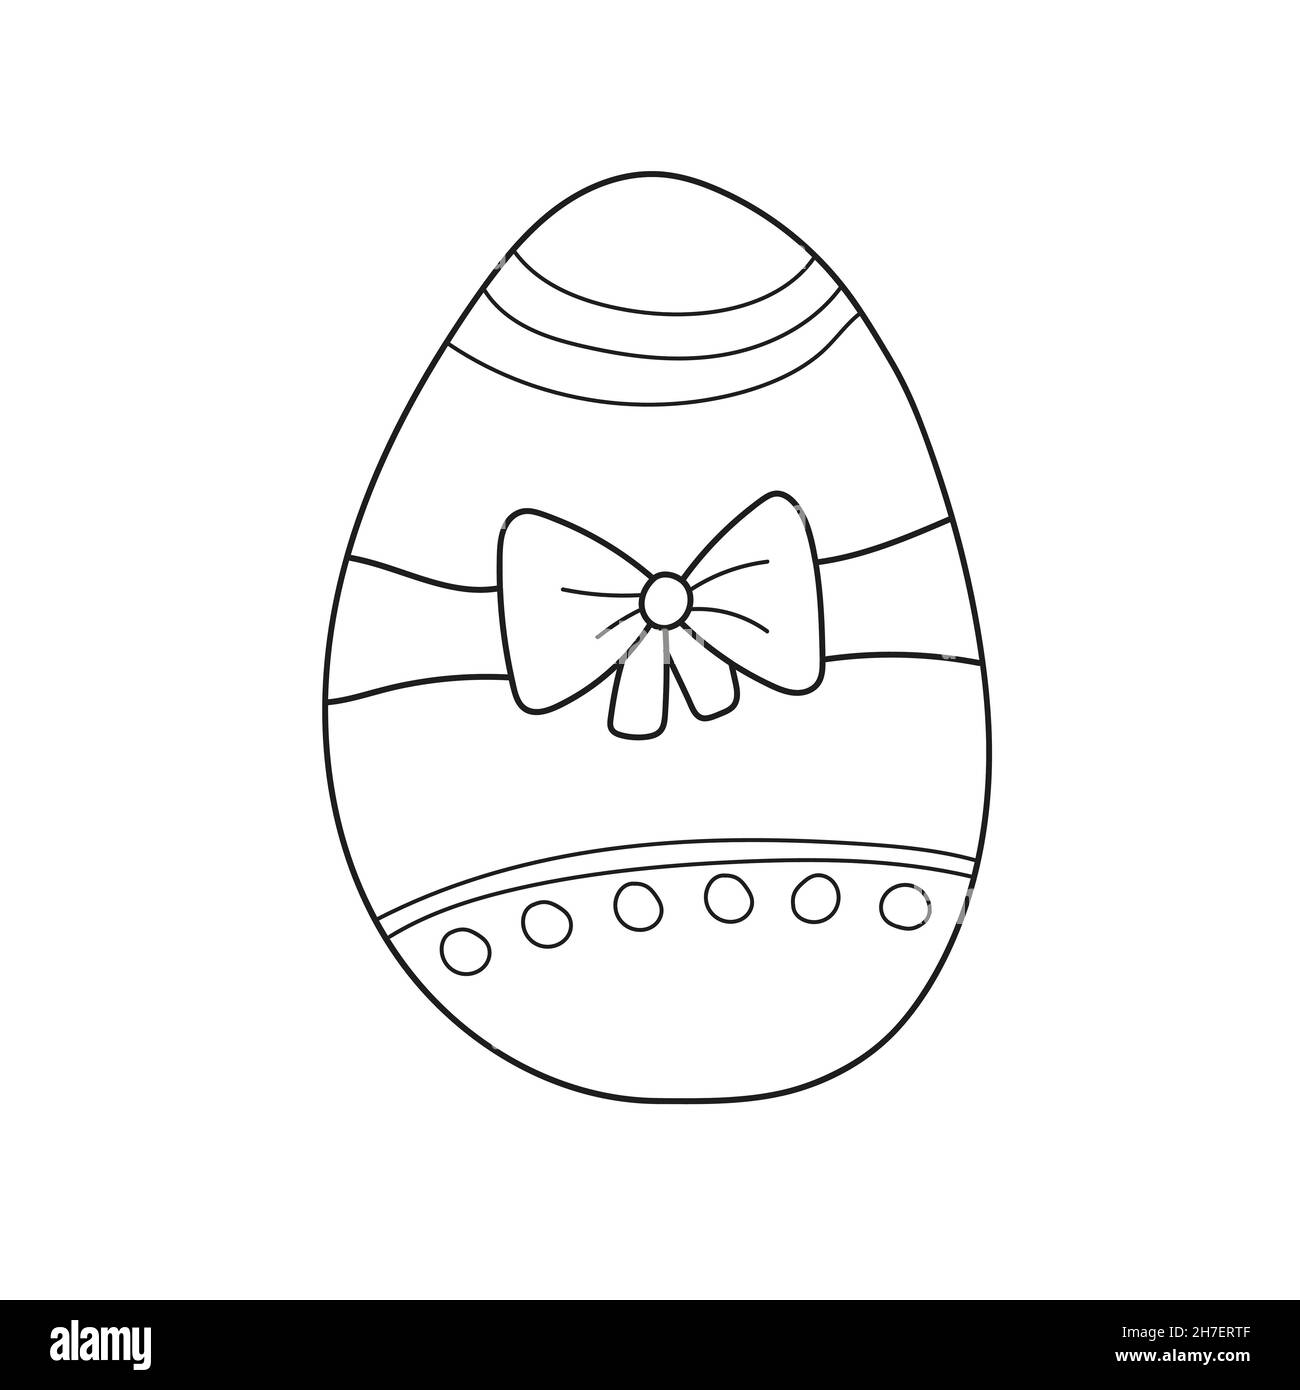 Simple coloring page decoration easter egg coloring book for kids hand drawn vector illustration stock vector image art